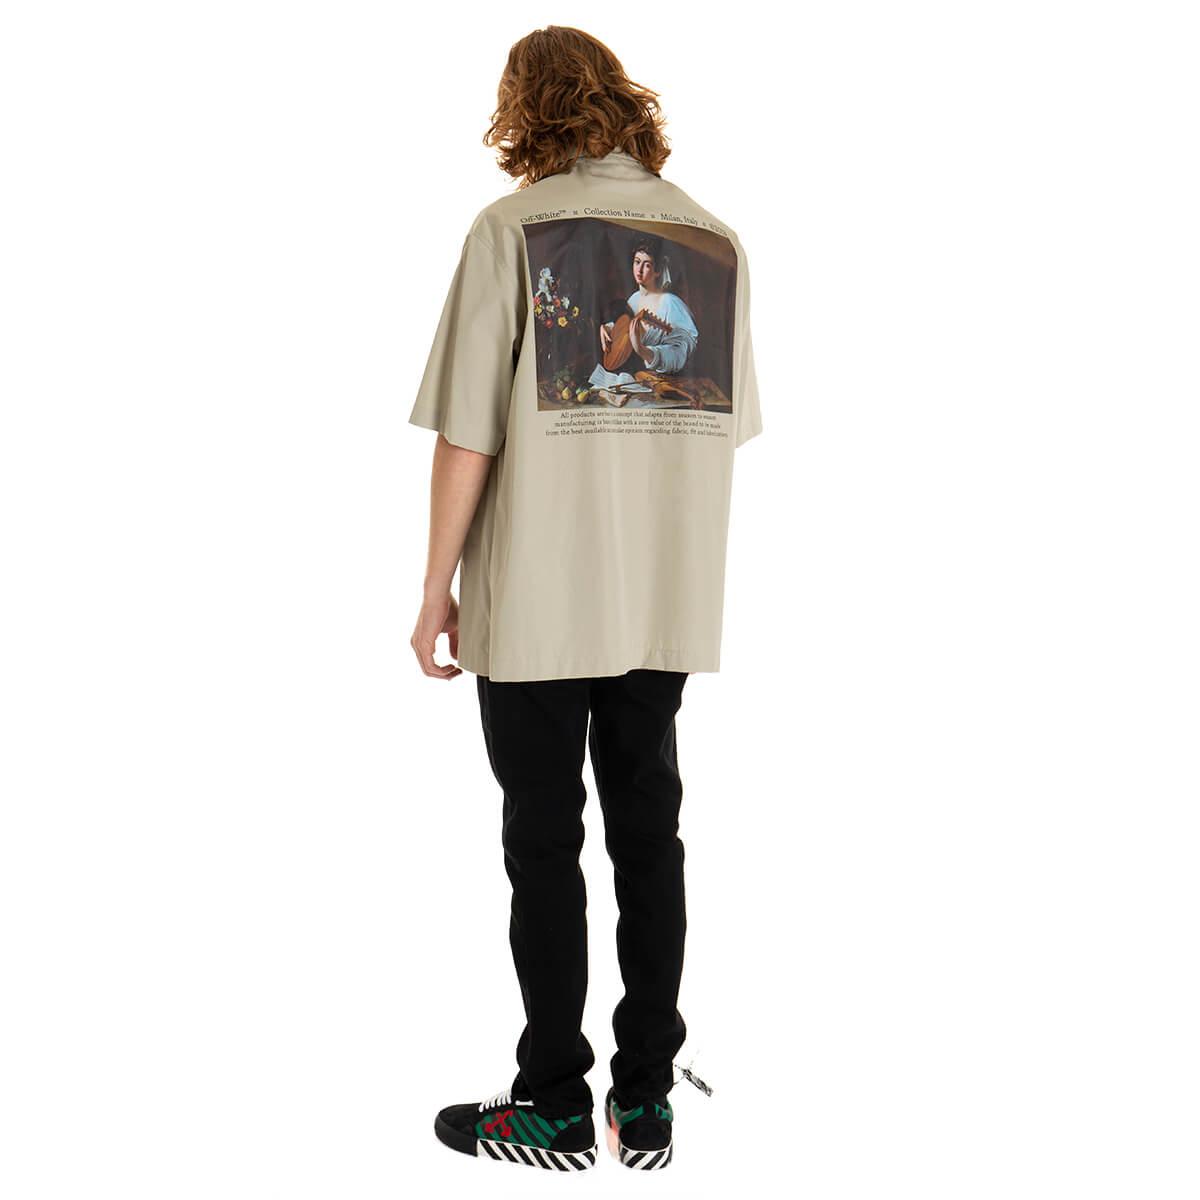 Off-White c/o Virgil Abloh Cotton Caravaggio Lute Holiday Shirt in 